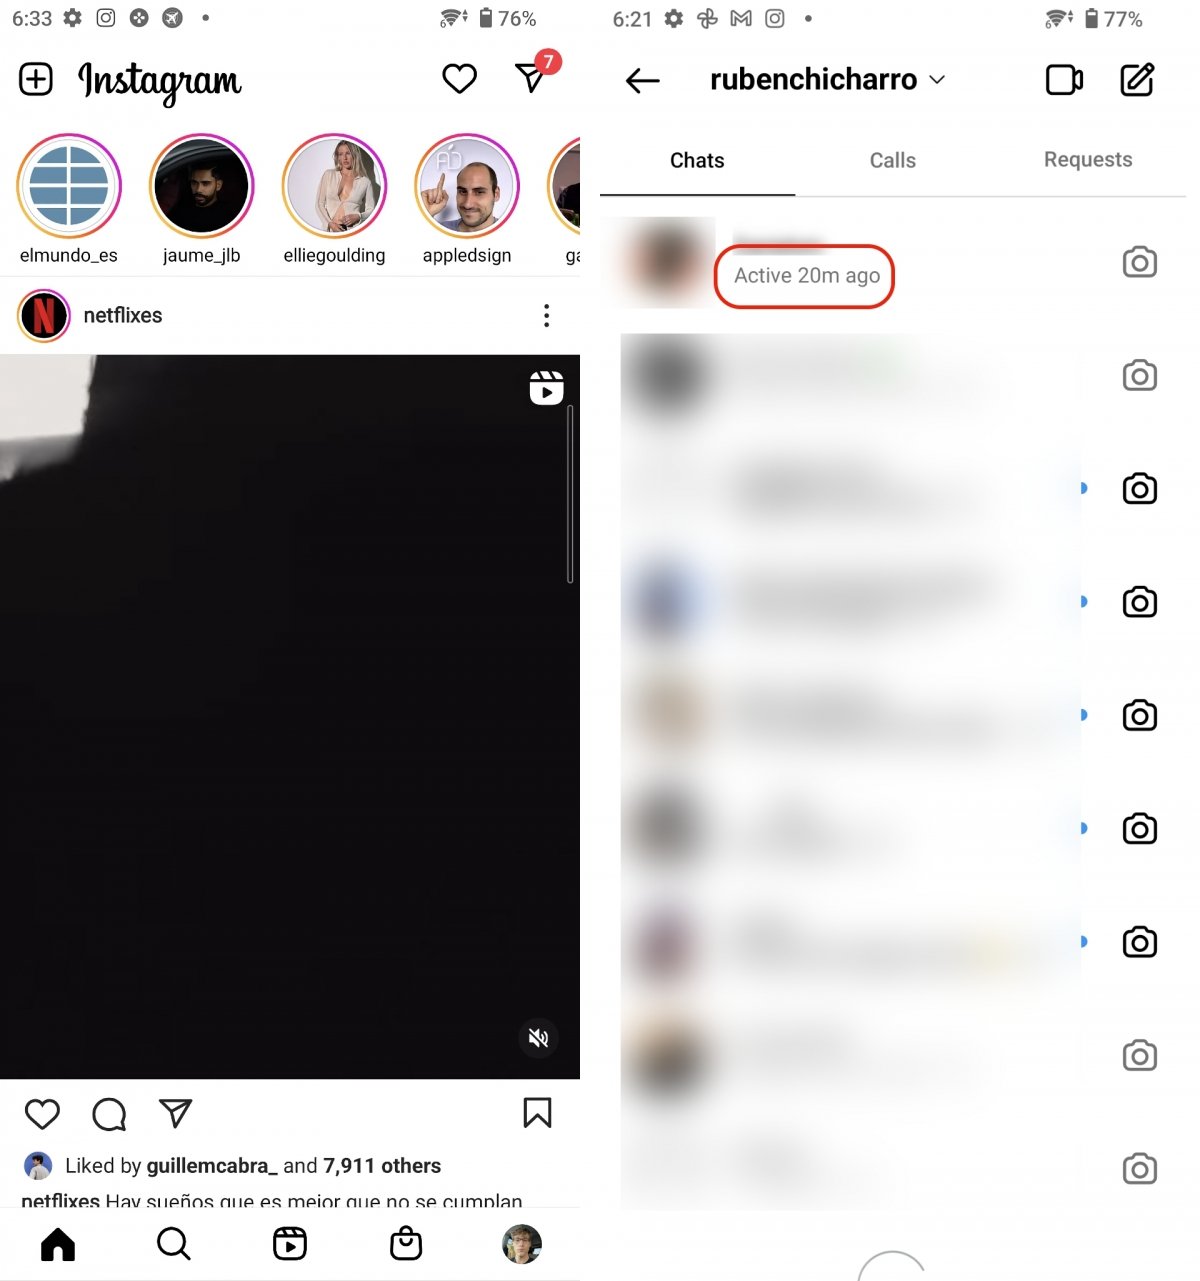 How to see the last seen time in Instagram